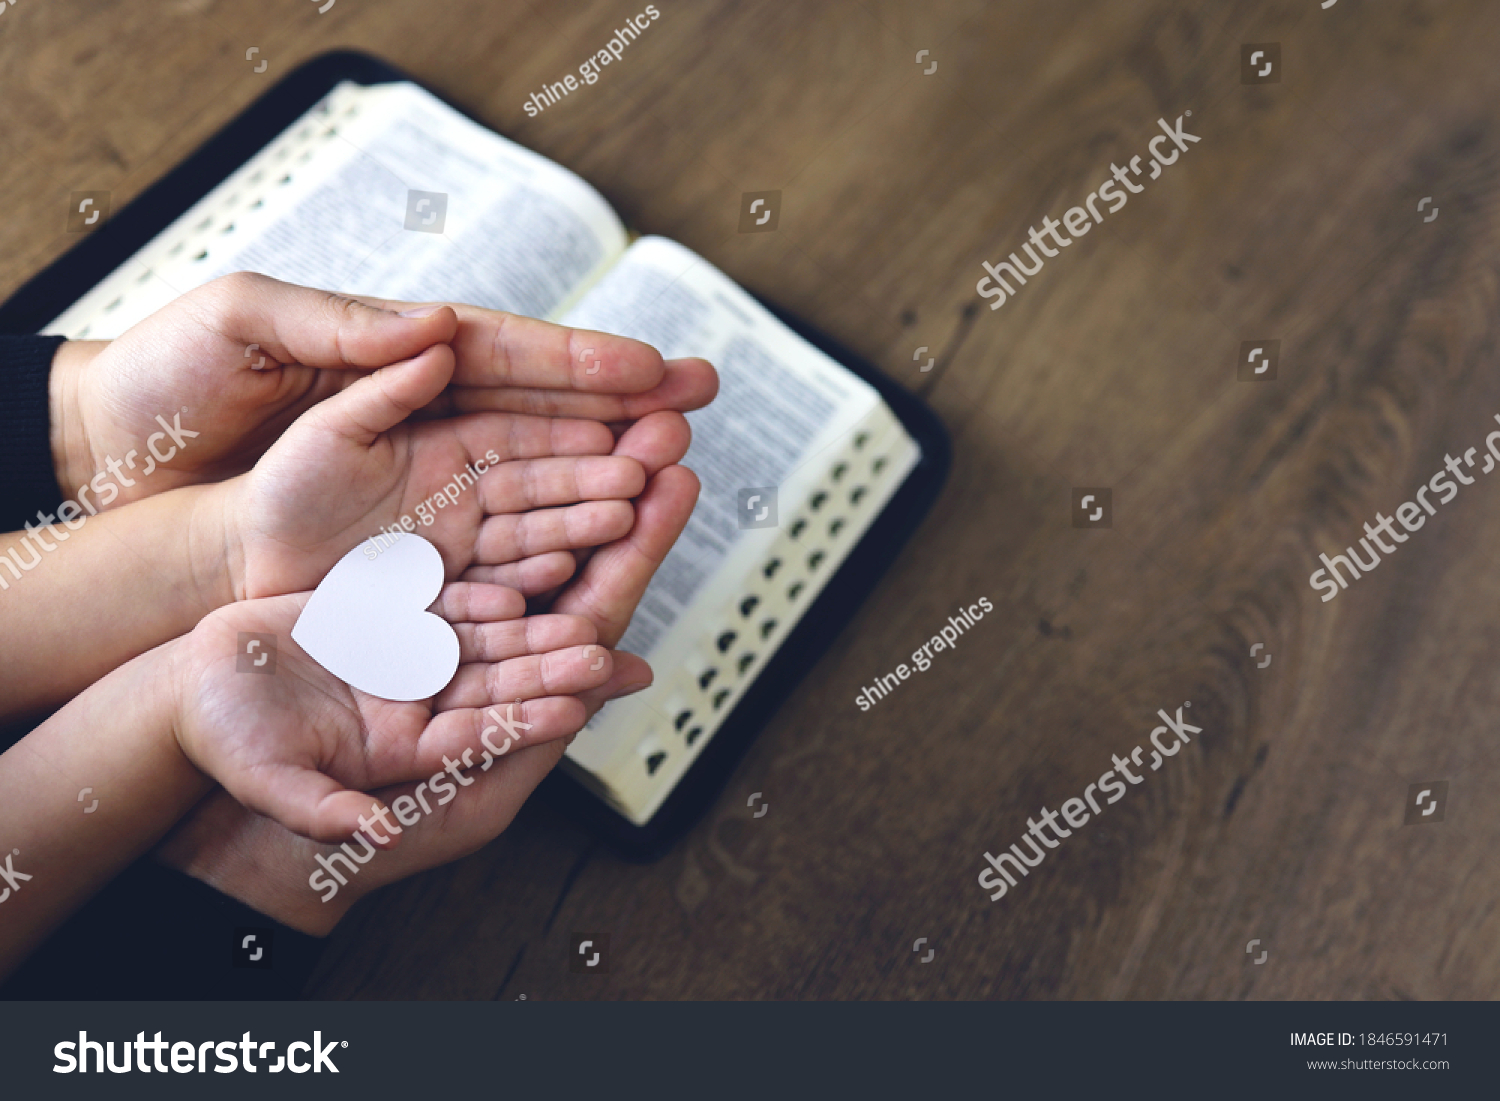 Religious Christian girl praying with her mother indoors. Bible in background. Hands holding white paper heart. Space for text #1846591471